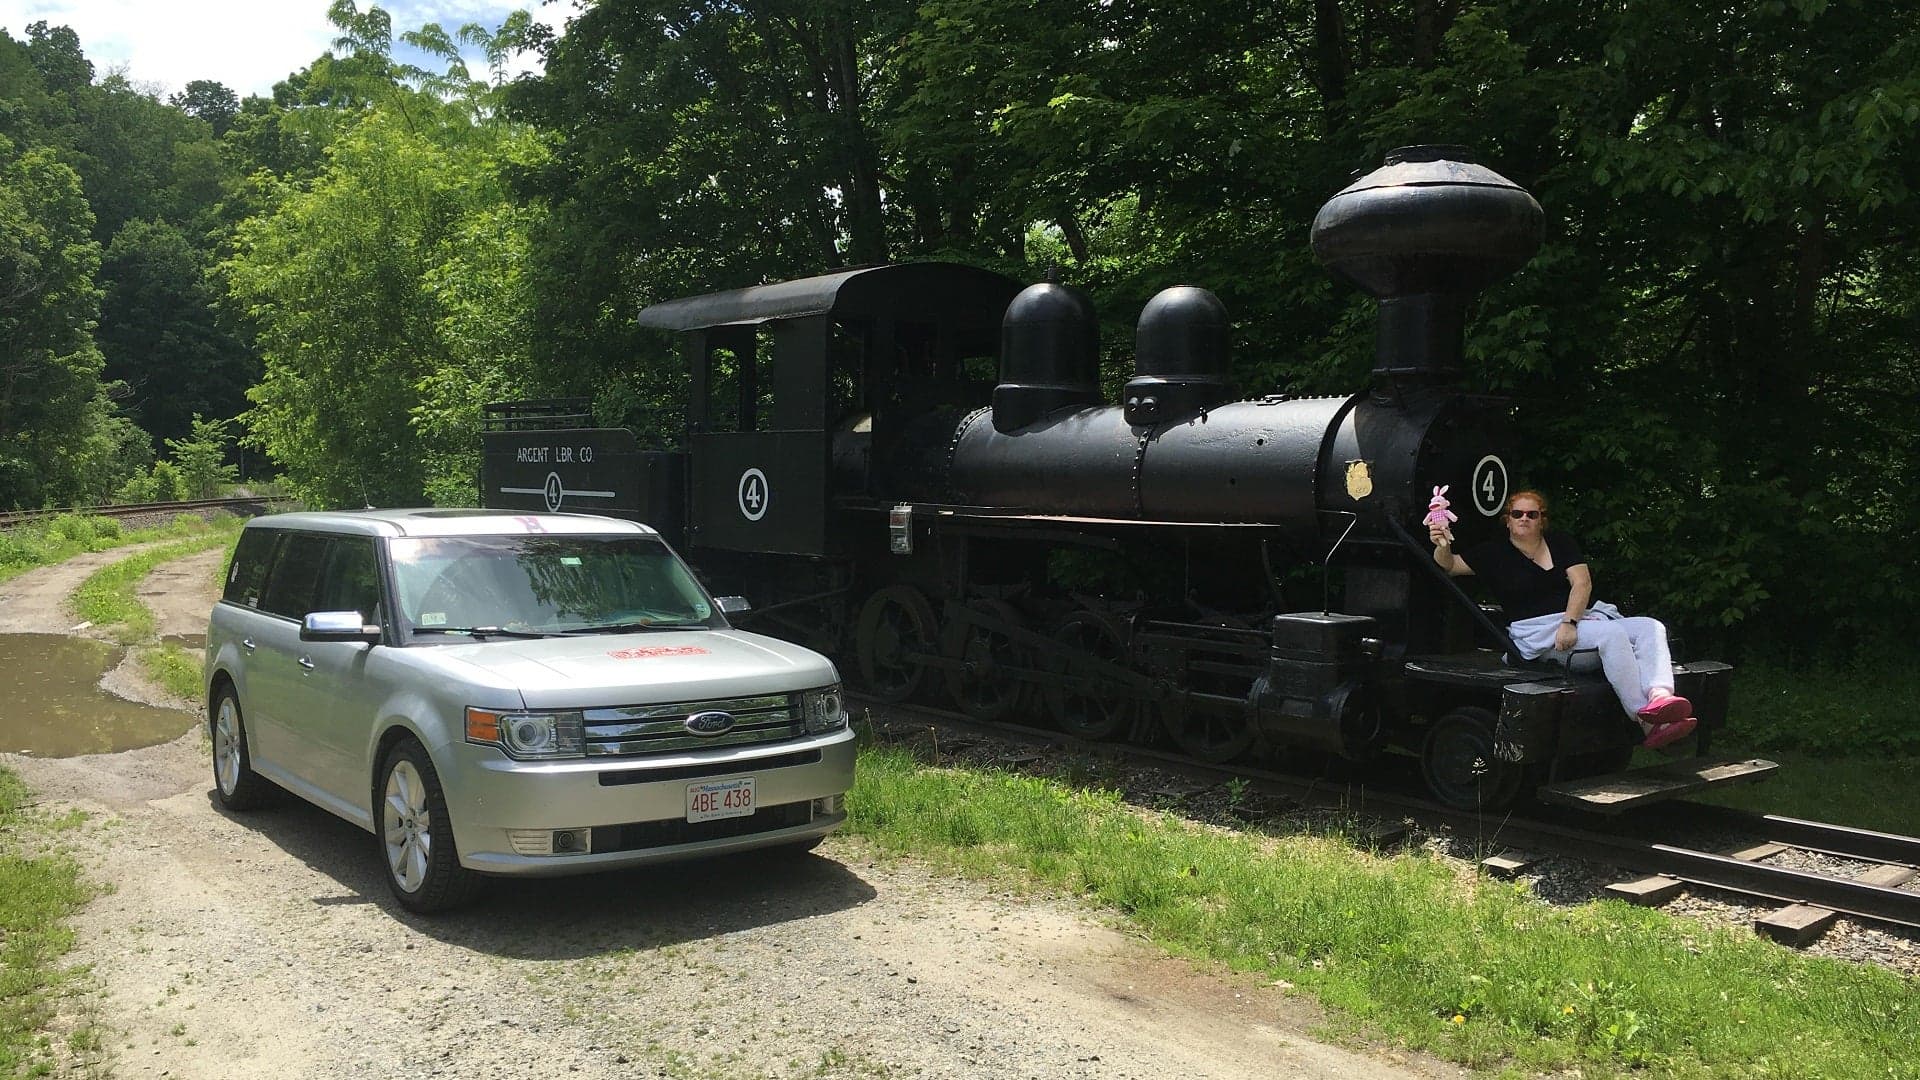 The Oppo Rally: Steaming Across Connecticut